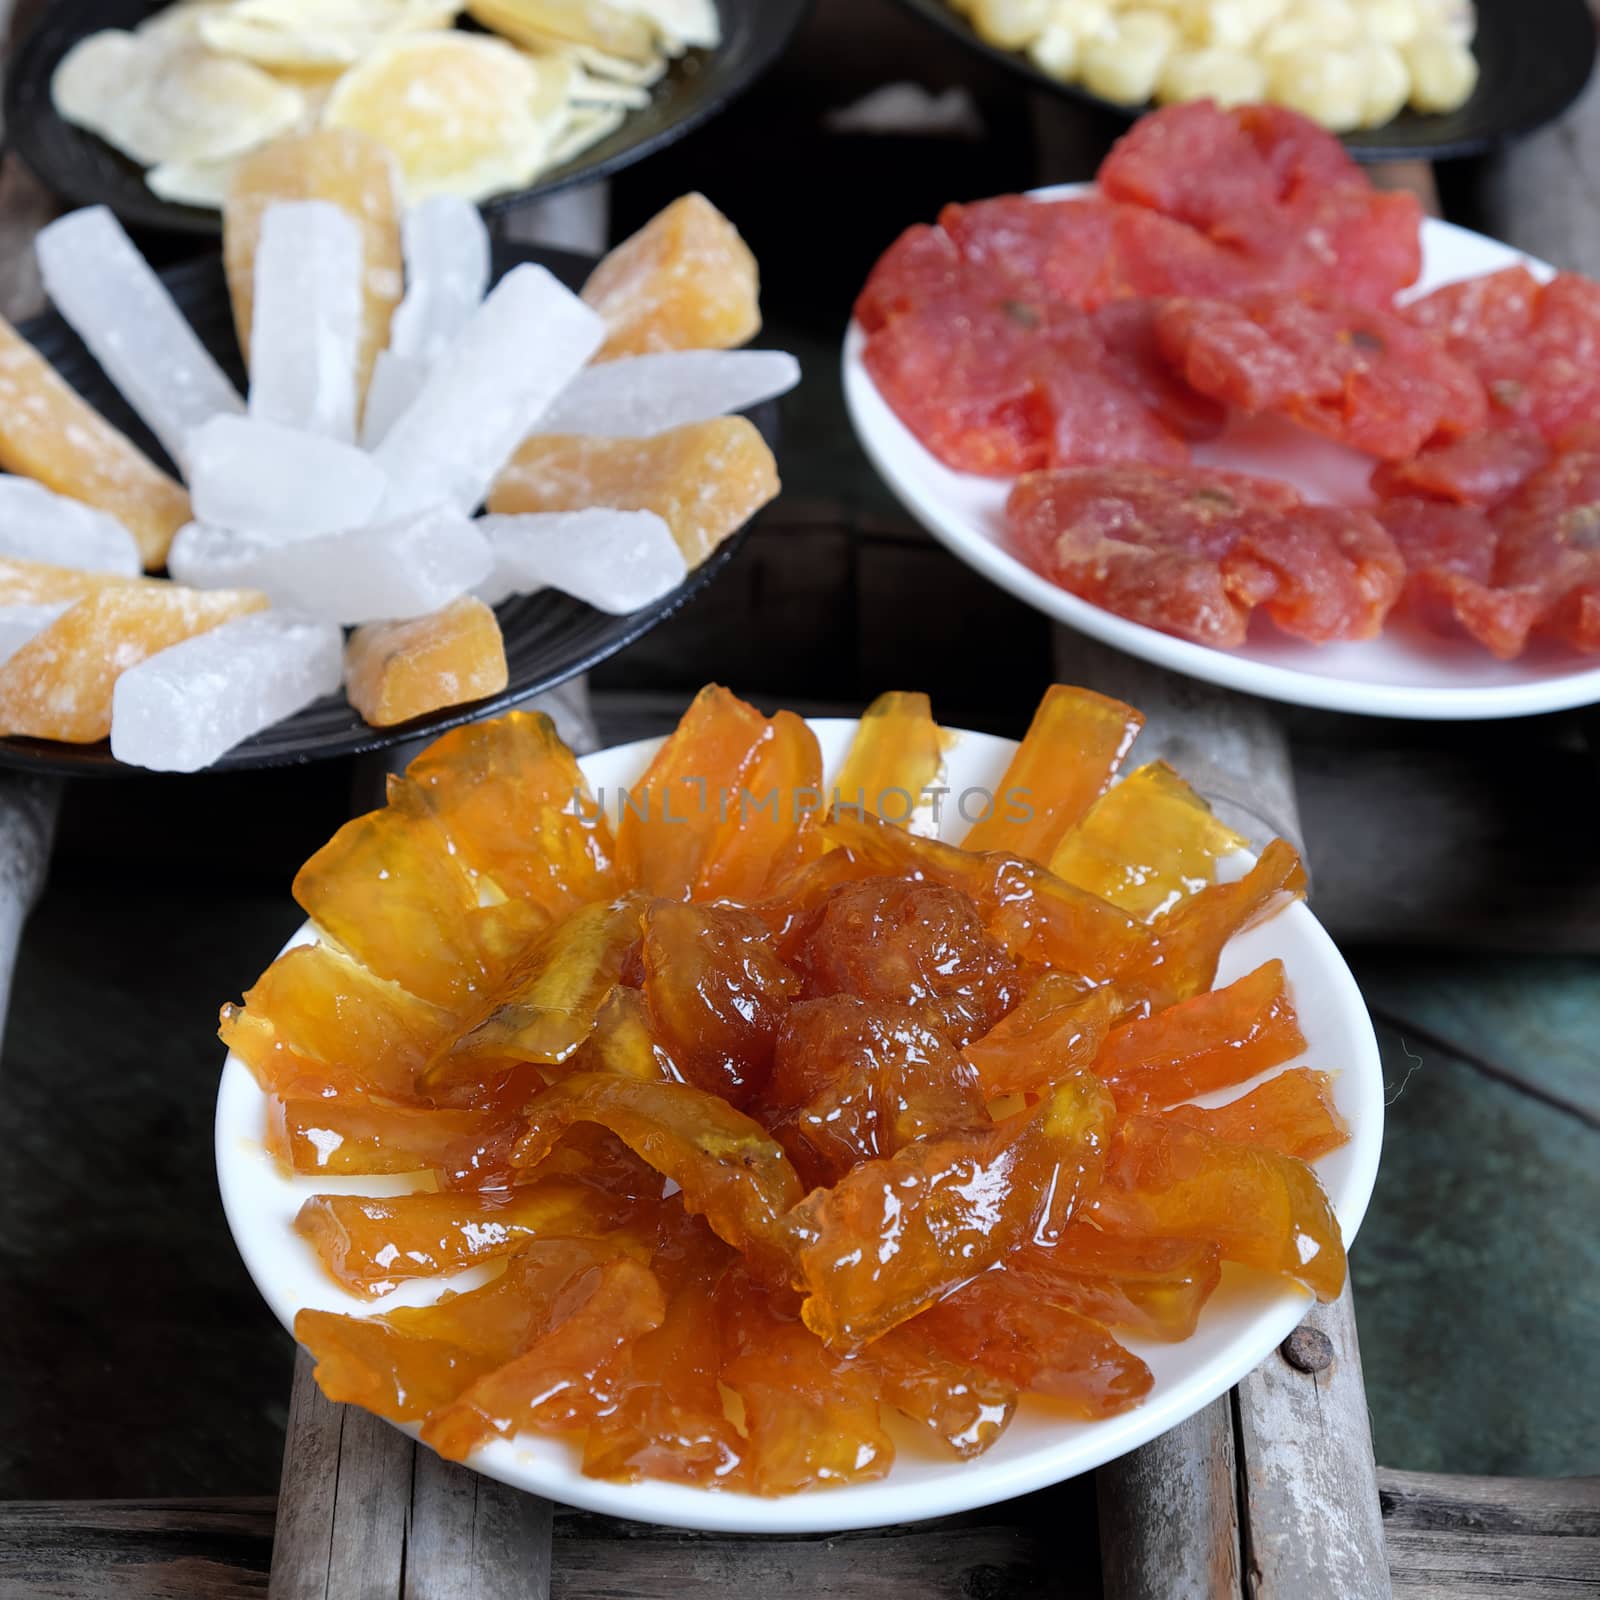 Amazing of Vietnamese food for Tet holiday in spring, jam is traditional food on lunar new year, make from sweet potato, lotus seed, ginger, mango with sugar, colorful background for Vietnam culture